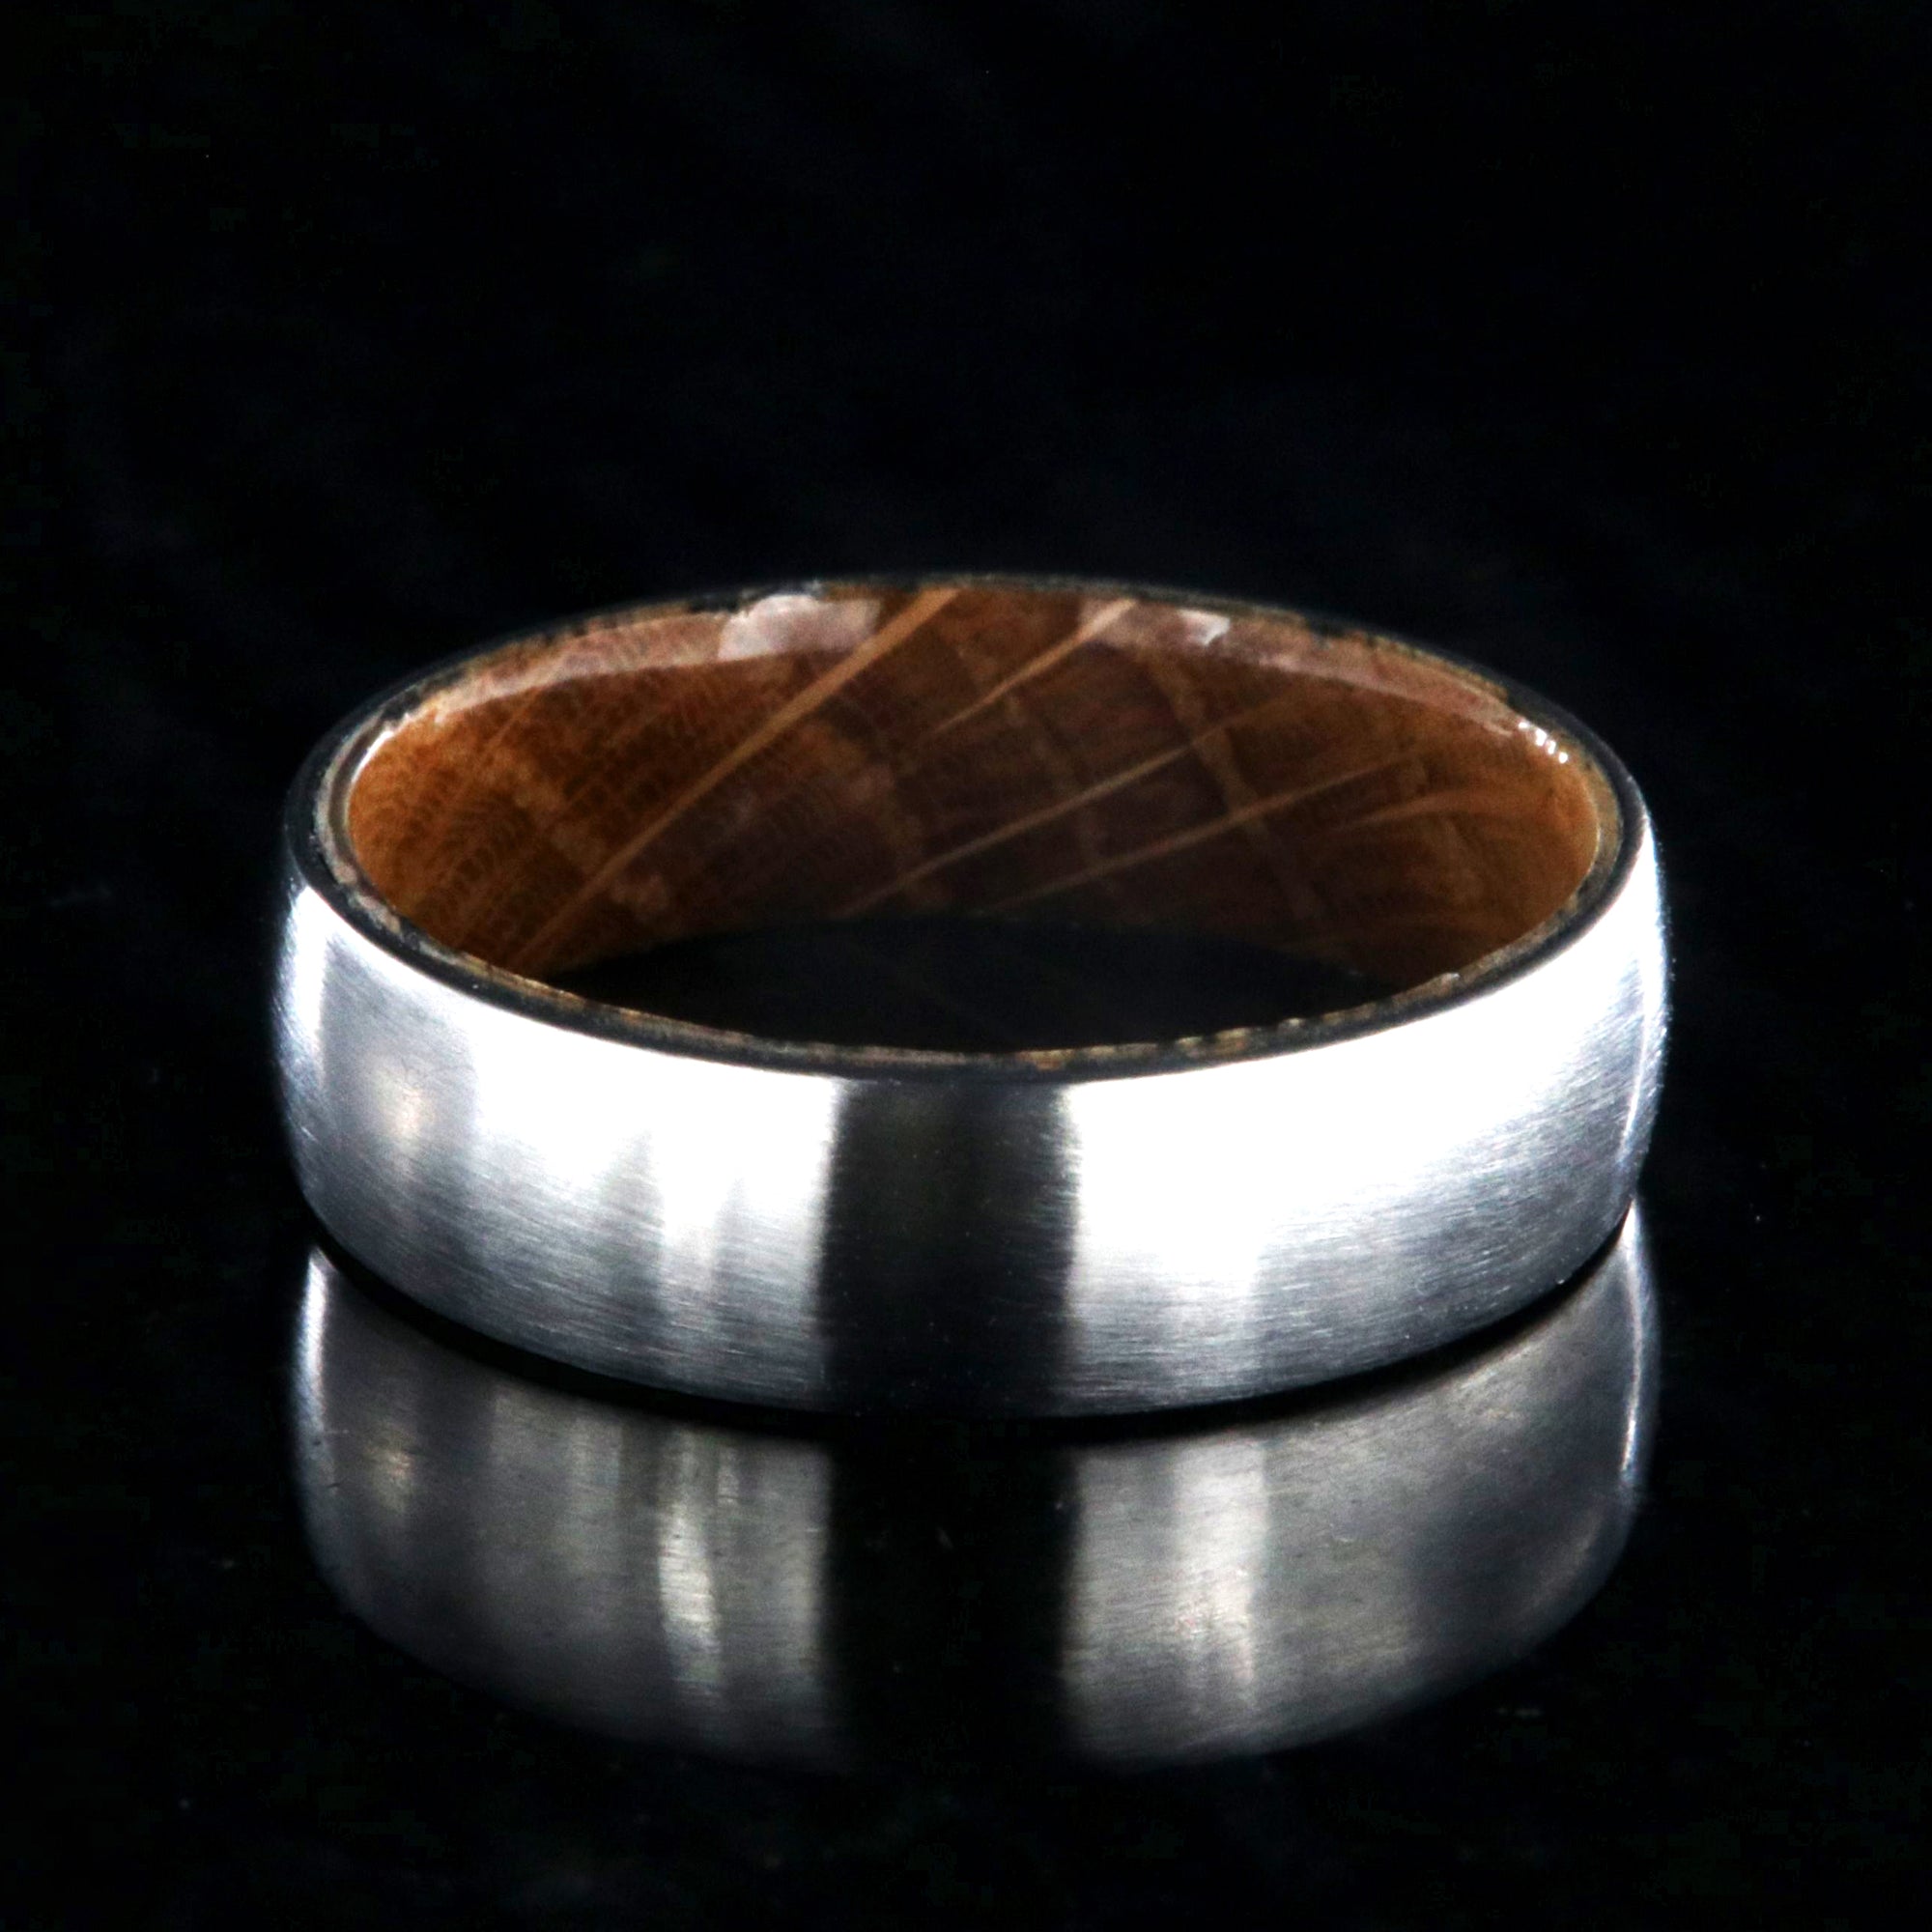 6mm wide cobalt wedding ring with a brushed finish and a Jack Daniel's whiskey barrel sleeve